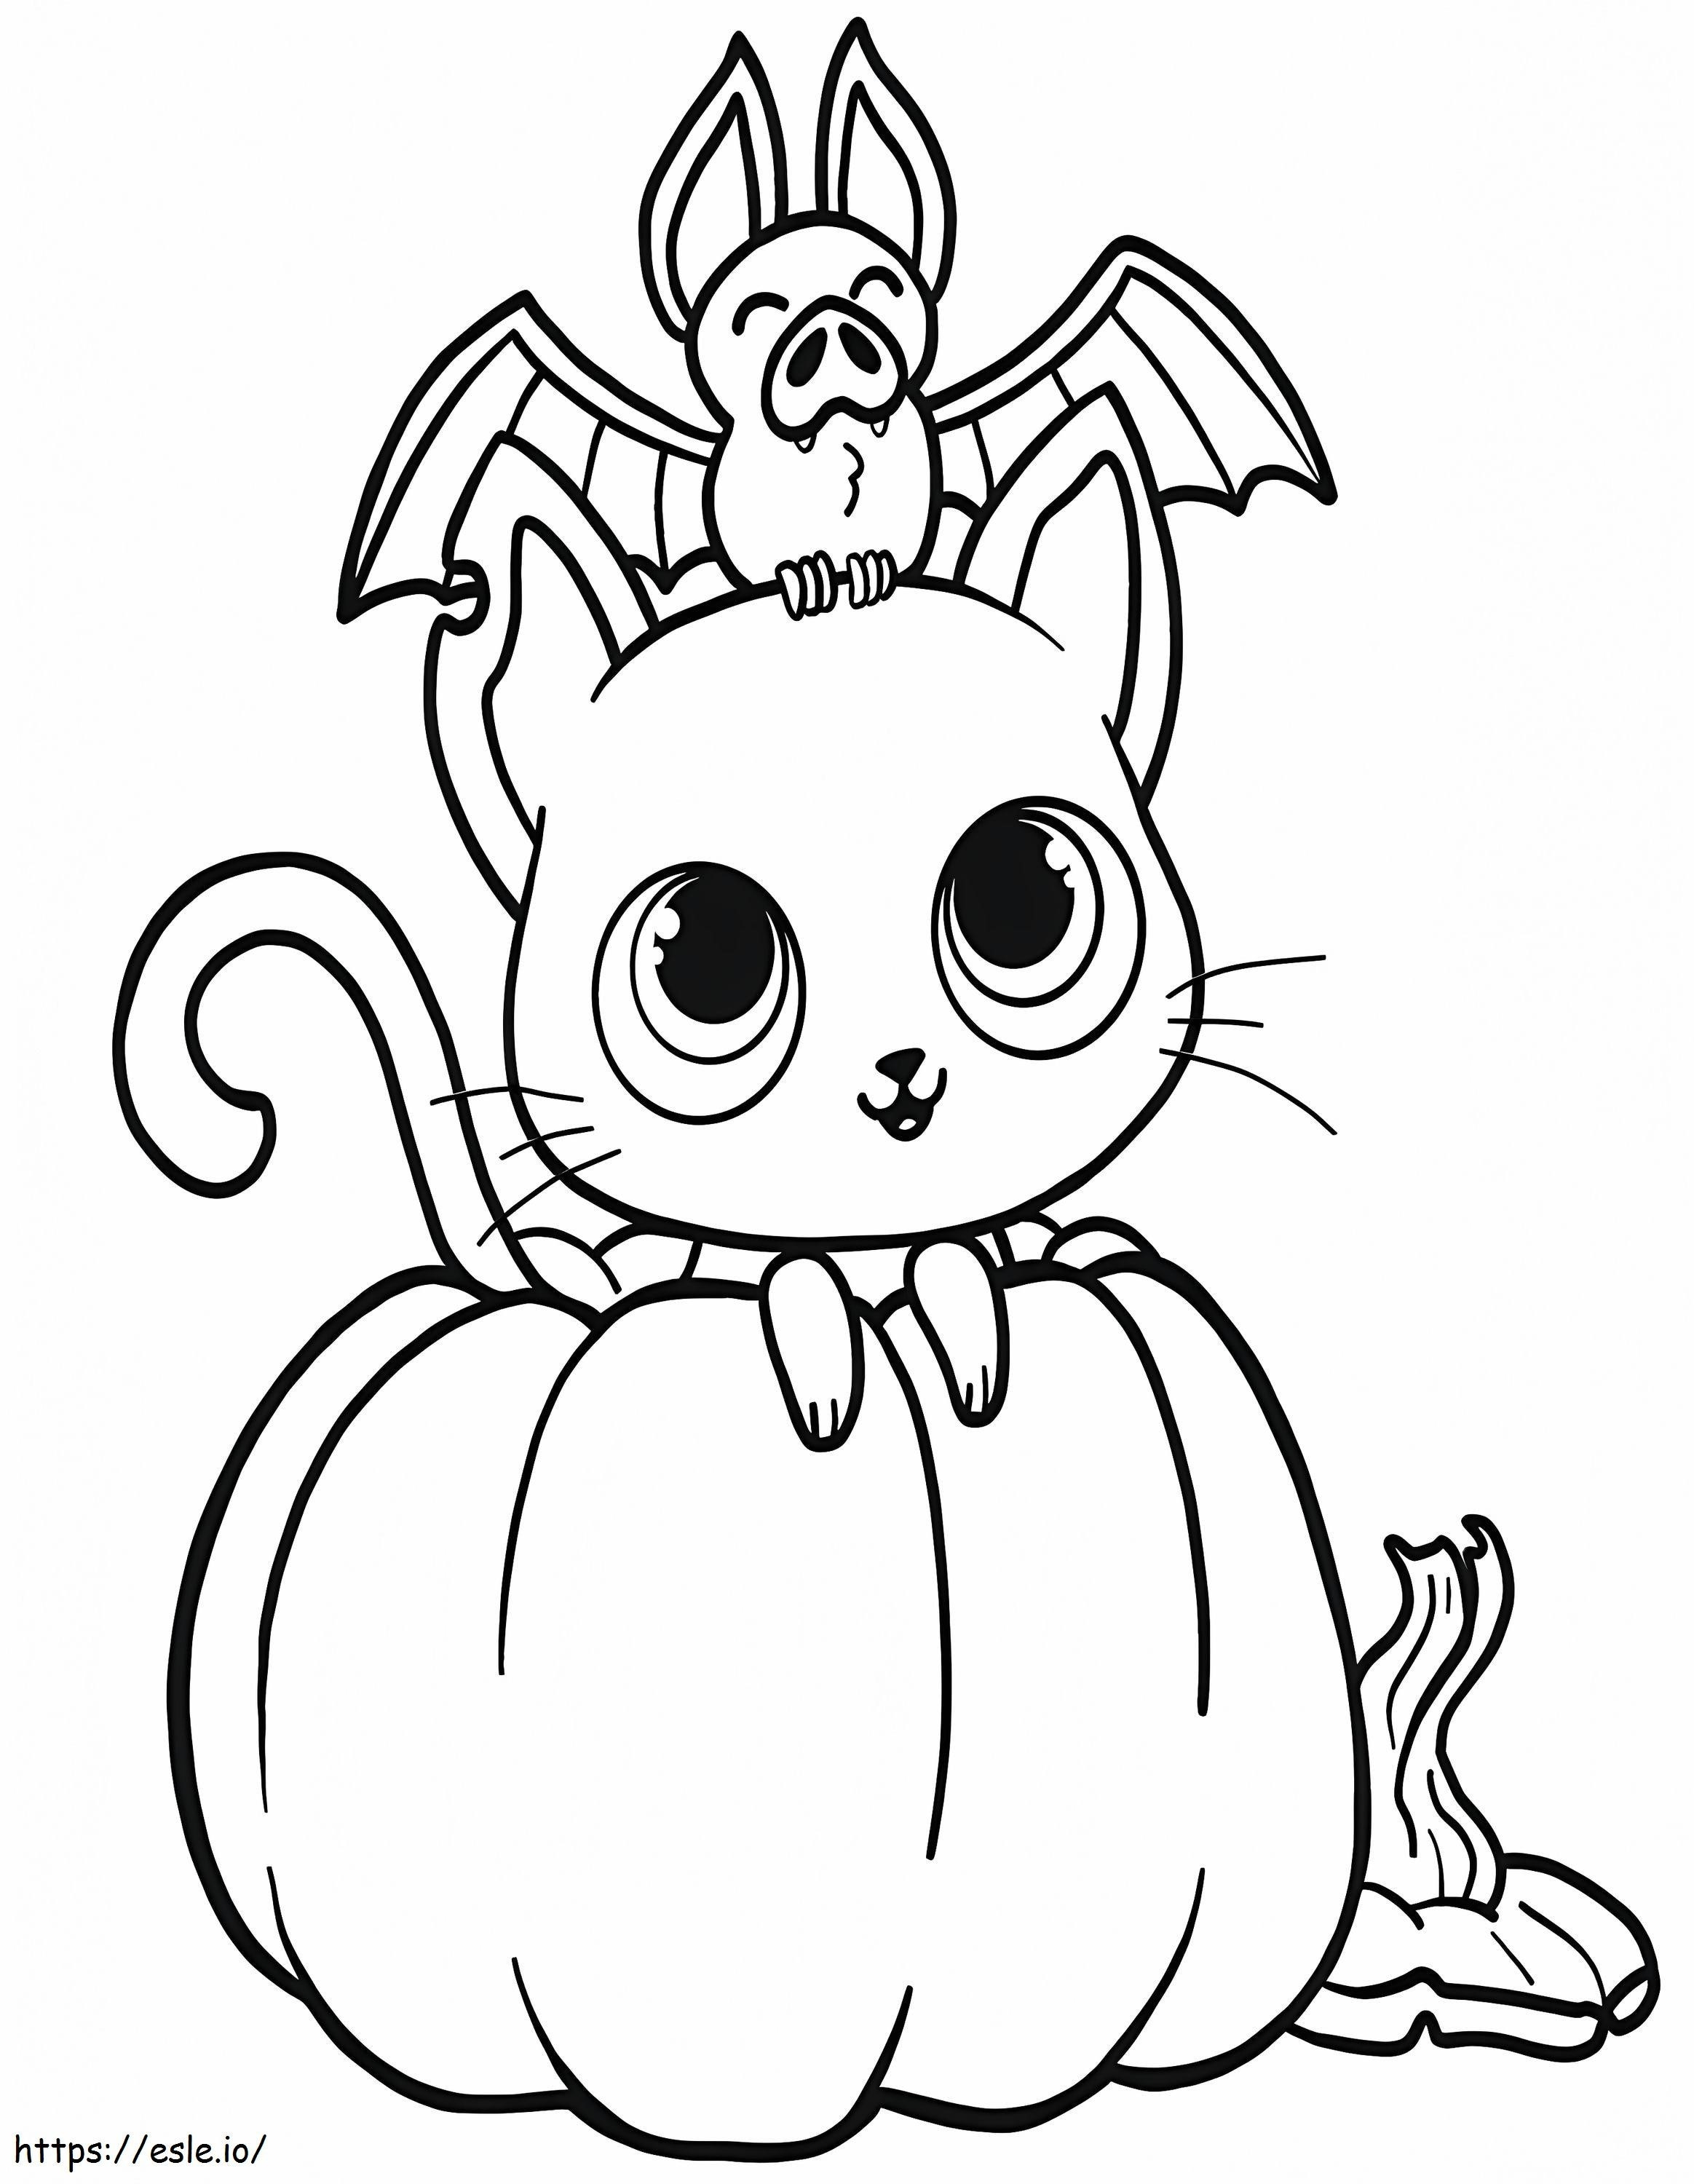 1560237639 Cat N Bat On Pumkin A4 coloring page